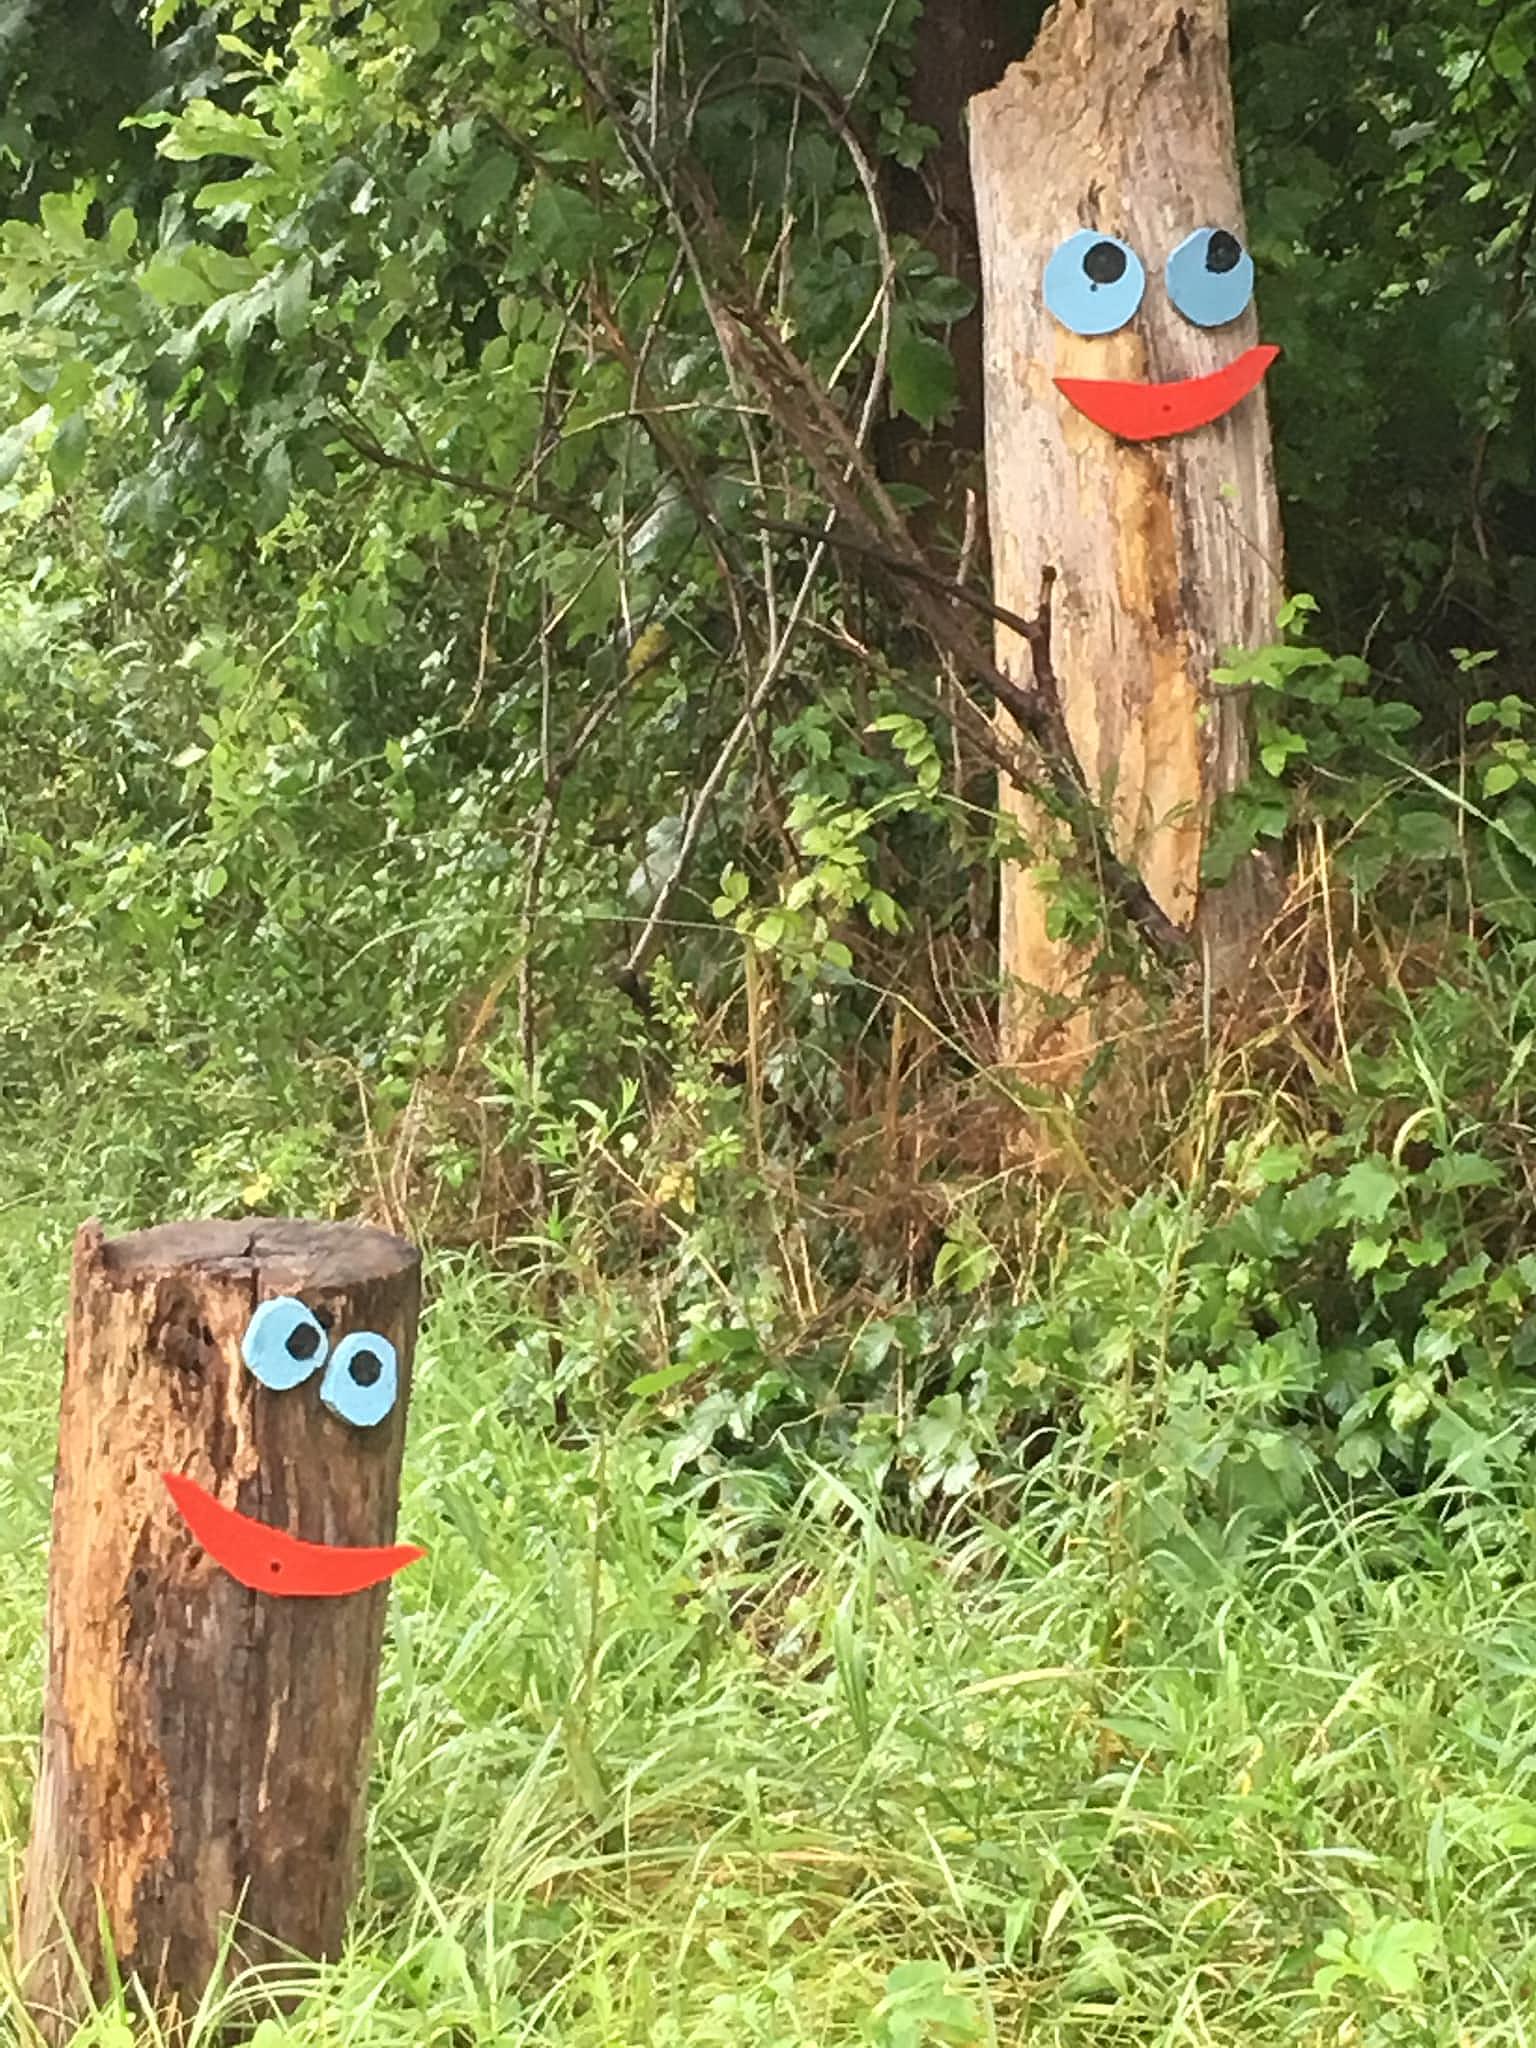 Spotted Decorative Tree Stumps Bring Smiles To Hudson Valley